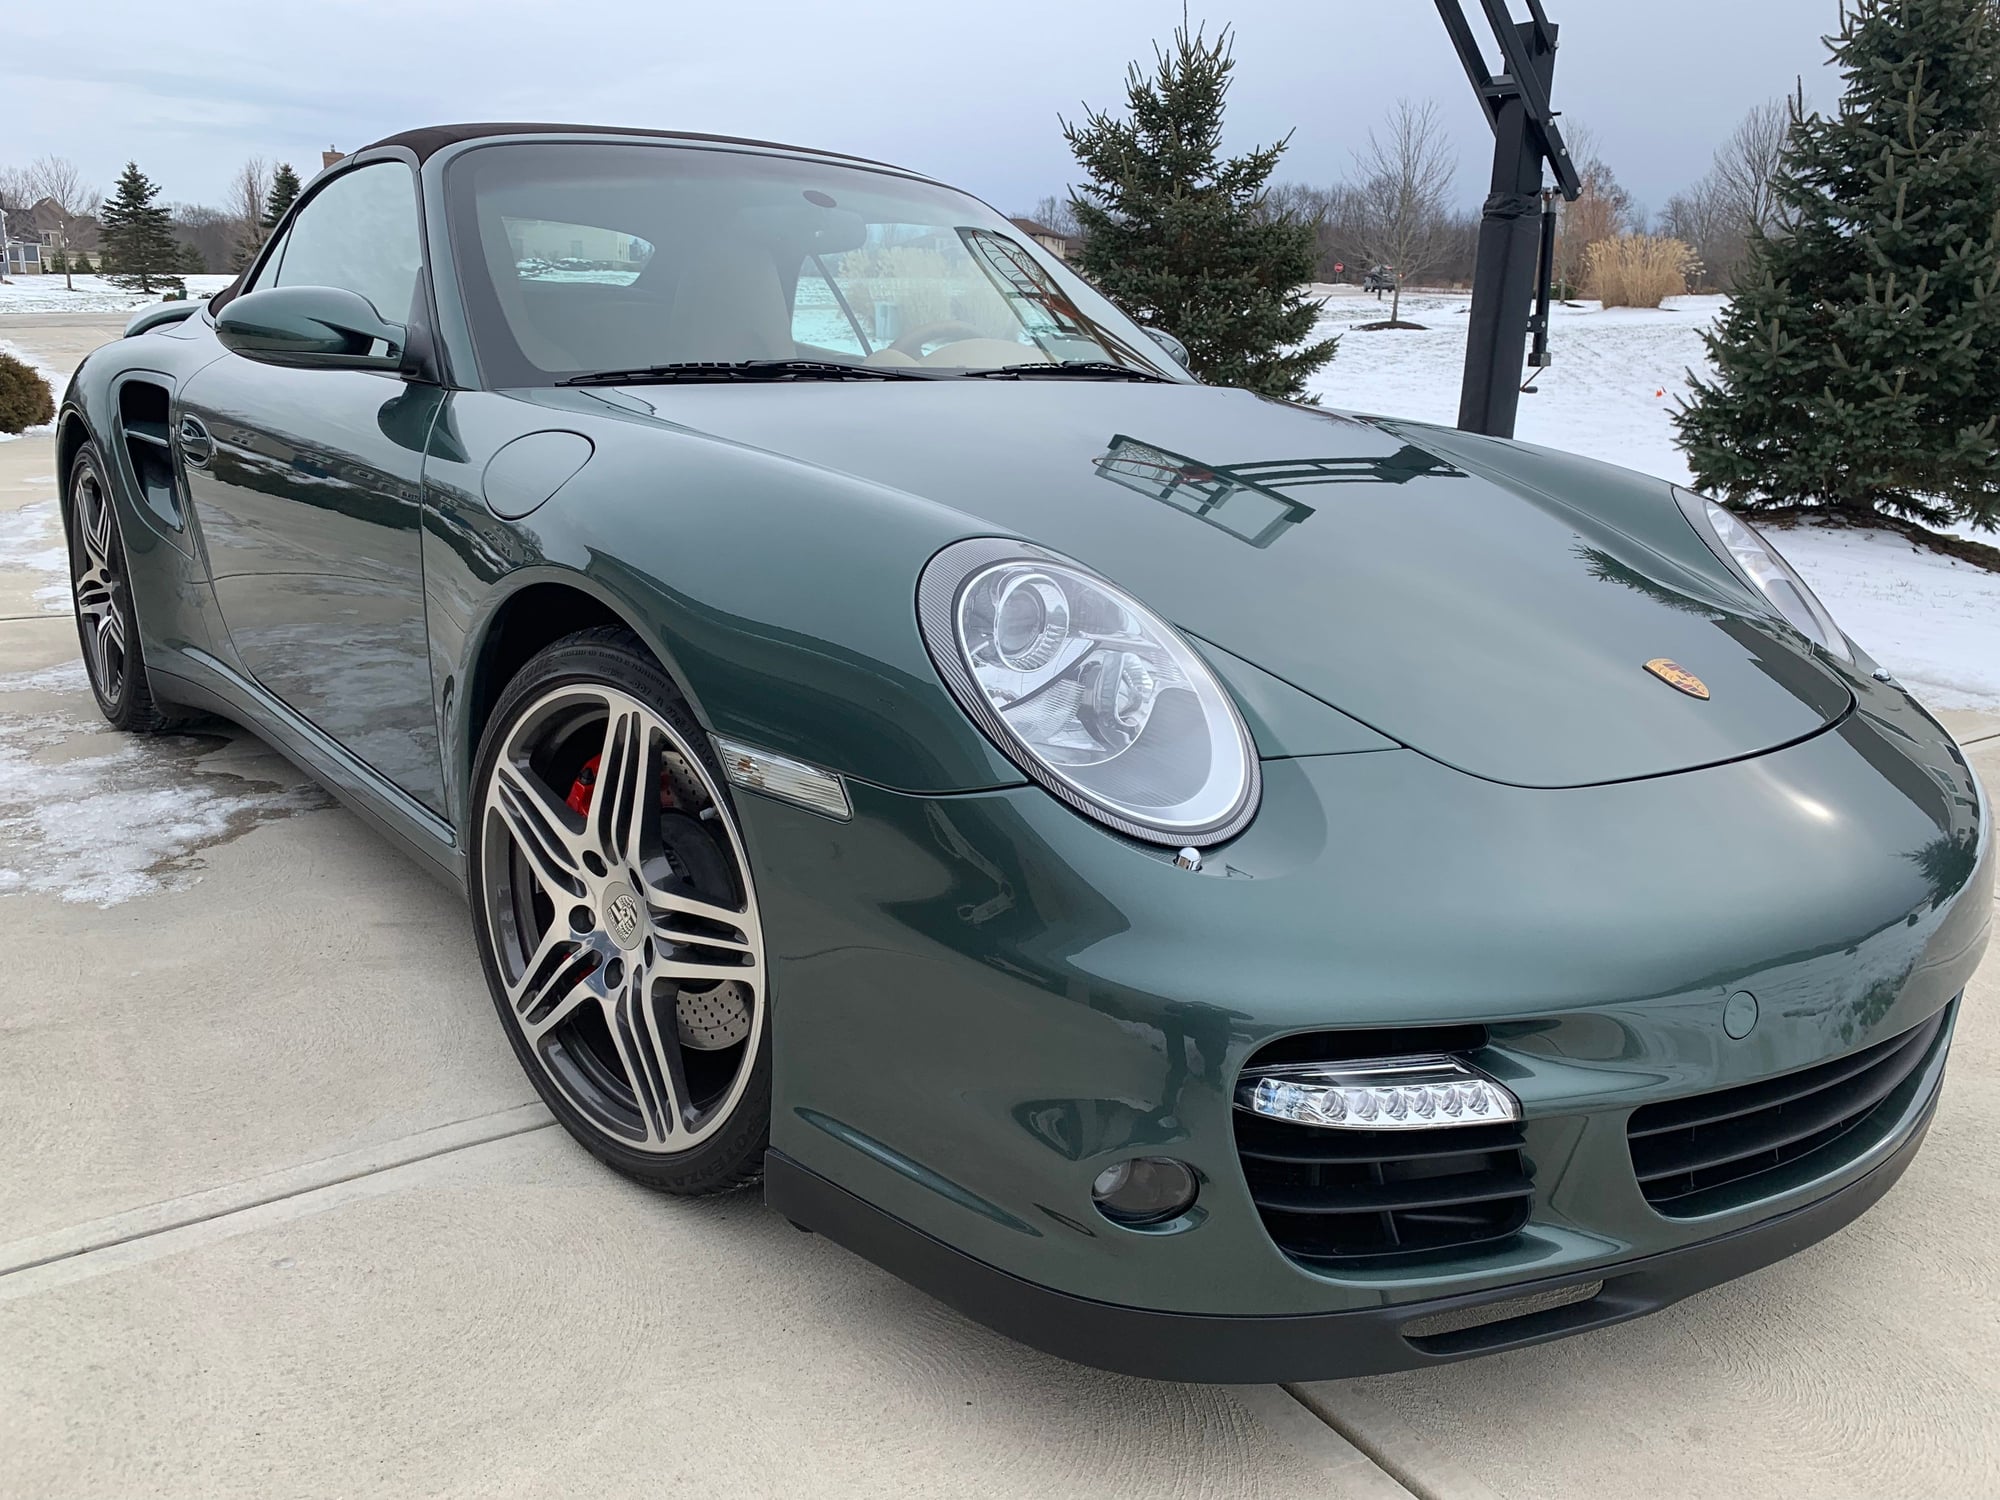 2009 Porsche 911 - 2009 TT Cab - Manual - Used - VIN WP0CD29979S773404 - 14,600 Miles - 6 cyl - AWD - Manual - Convertible - Other - Chagrin Falls, OH 44023, United States